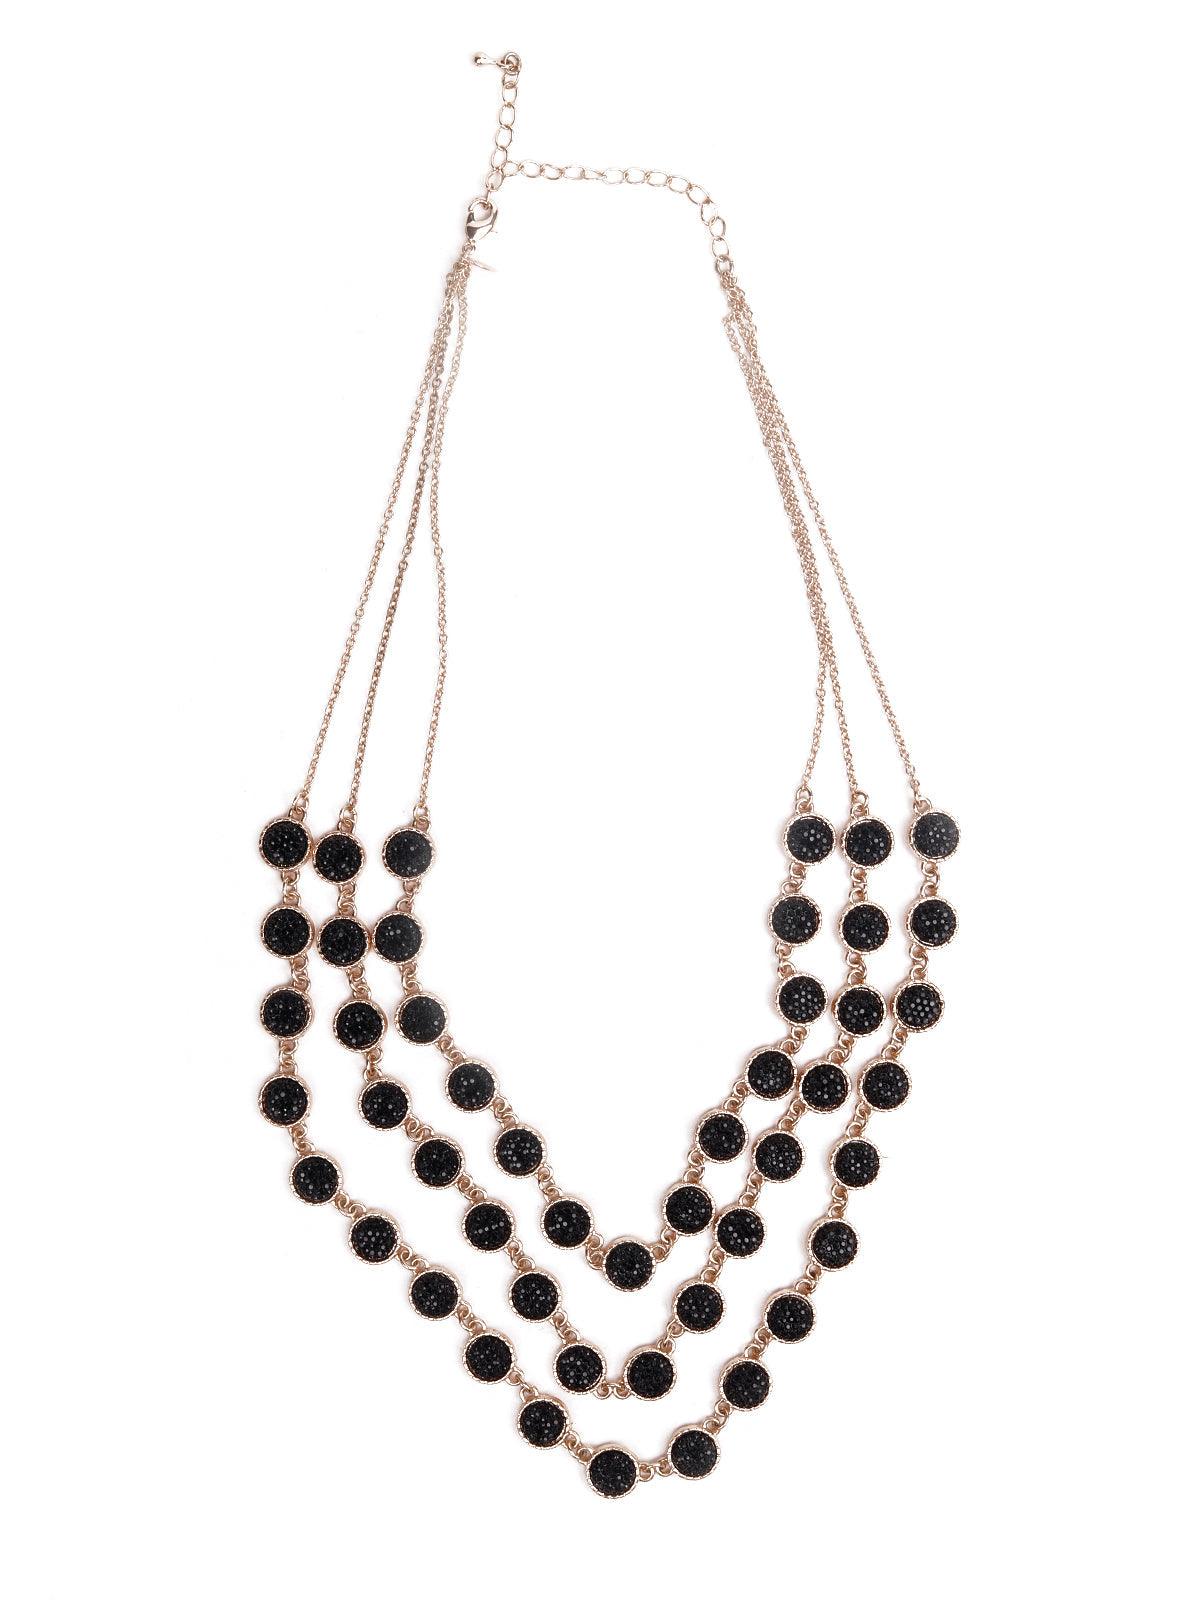 Women's Black Beaded Layered Necklace - Odette